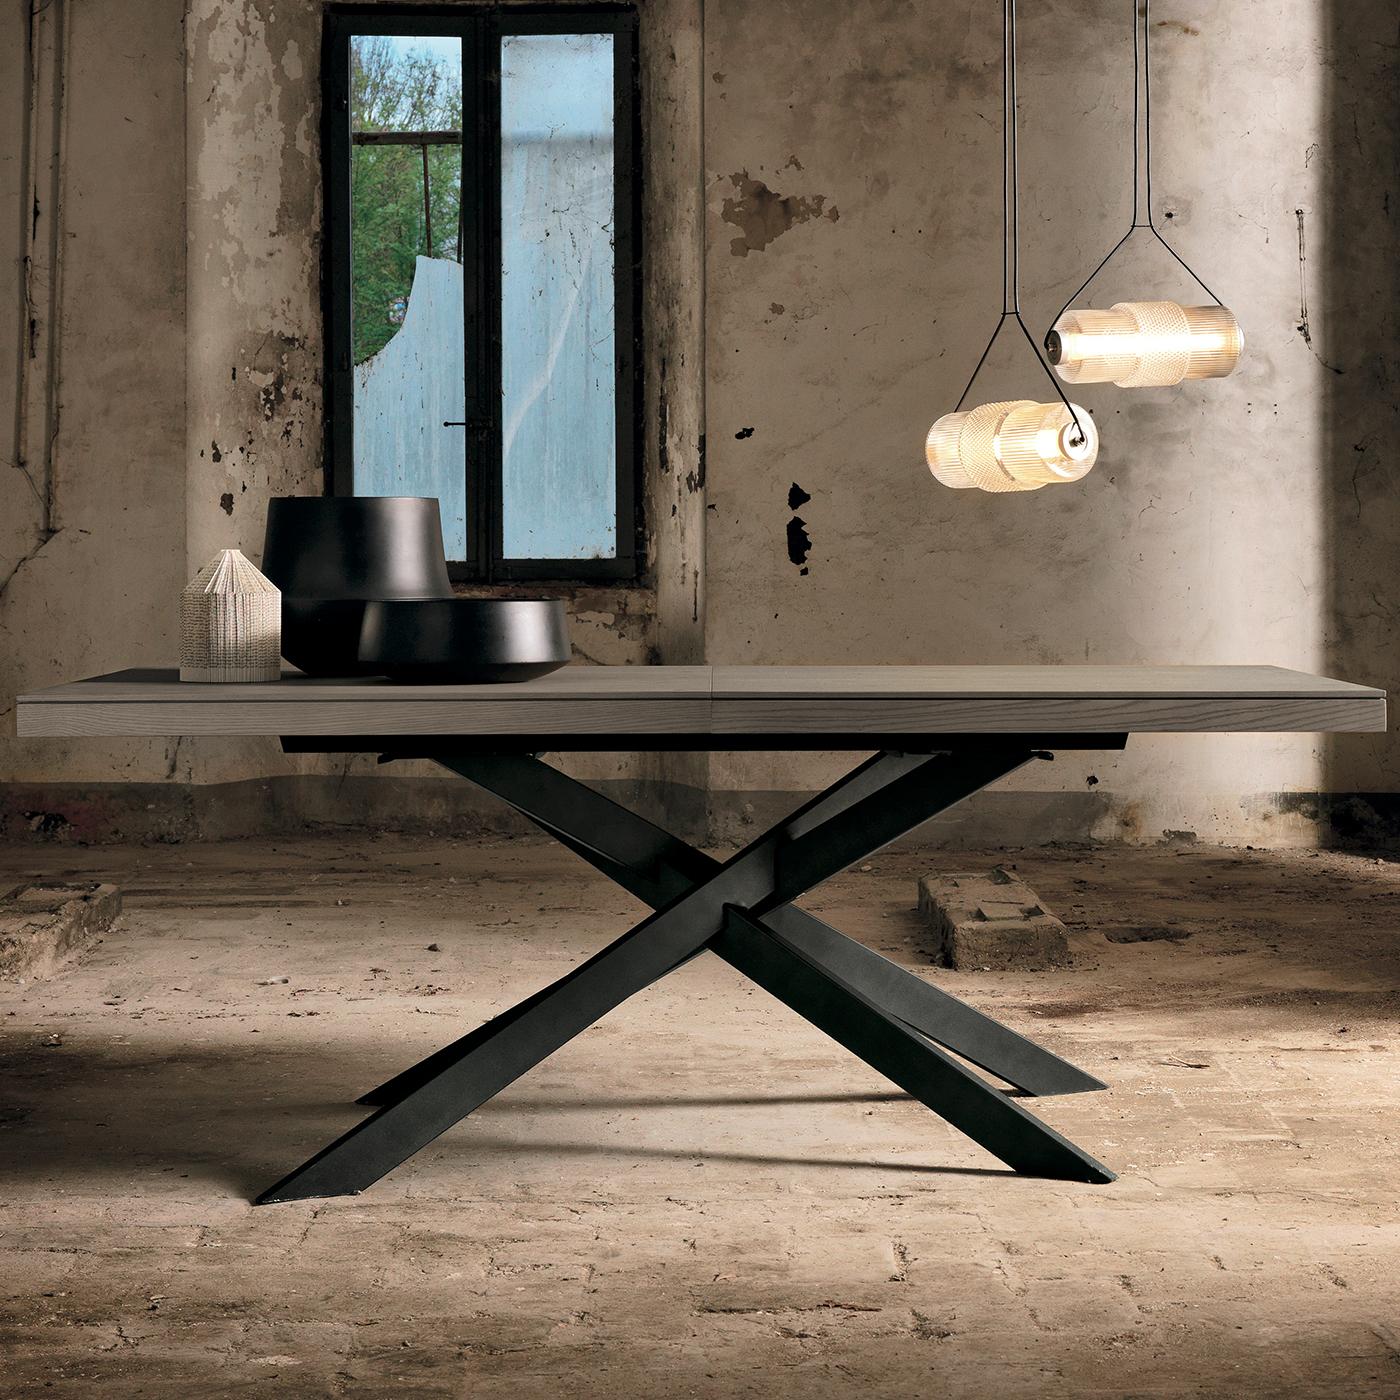 Part of the Davis collection, this table is extendable from a length of 180 cm to 315 cm, making it a versatile and practical addition to every modern space, including small apartments. Its frame is in anodized aluminum, and the metal structure has